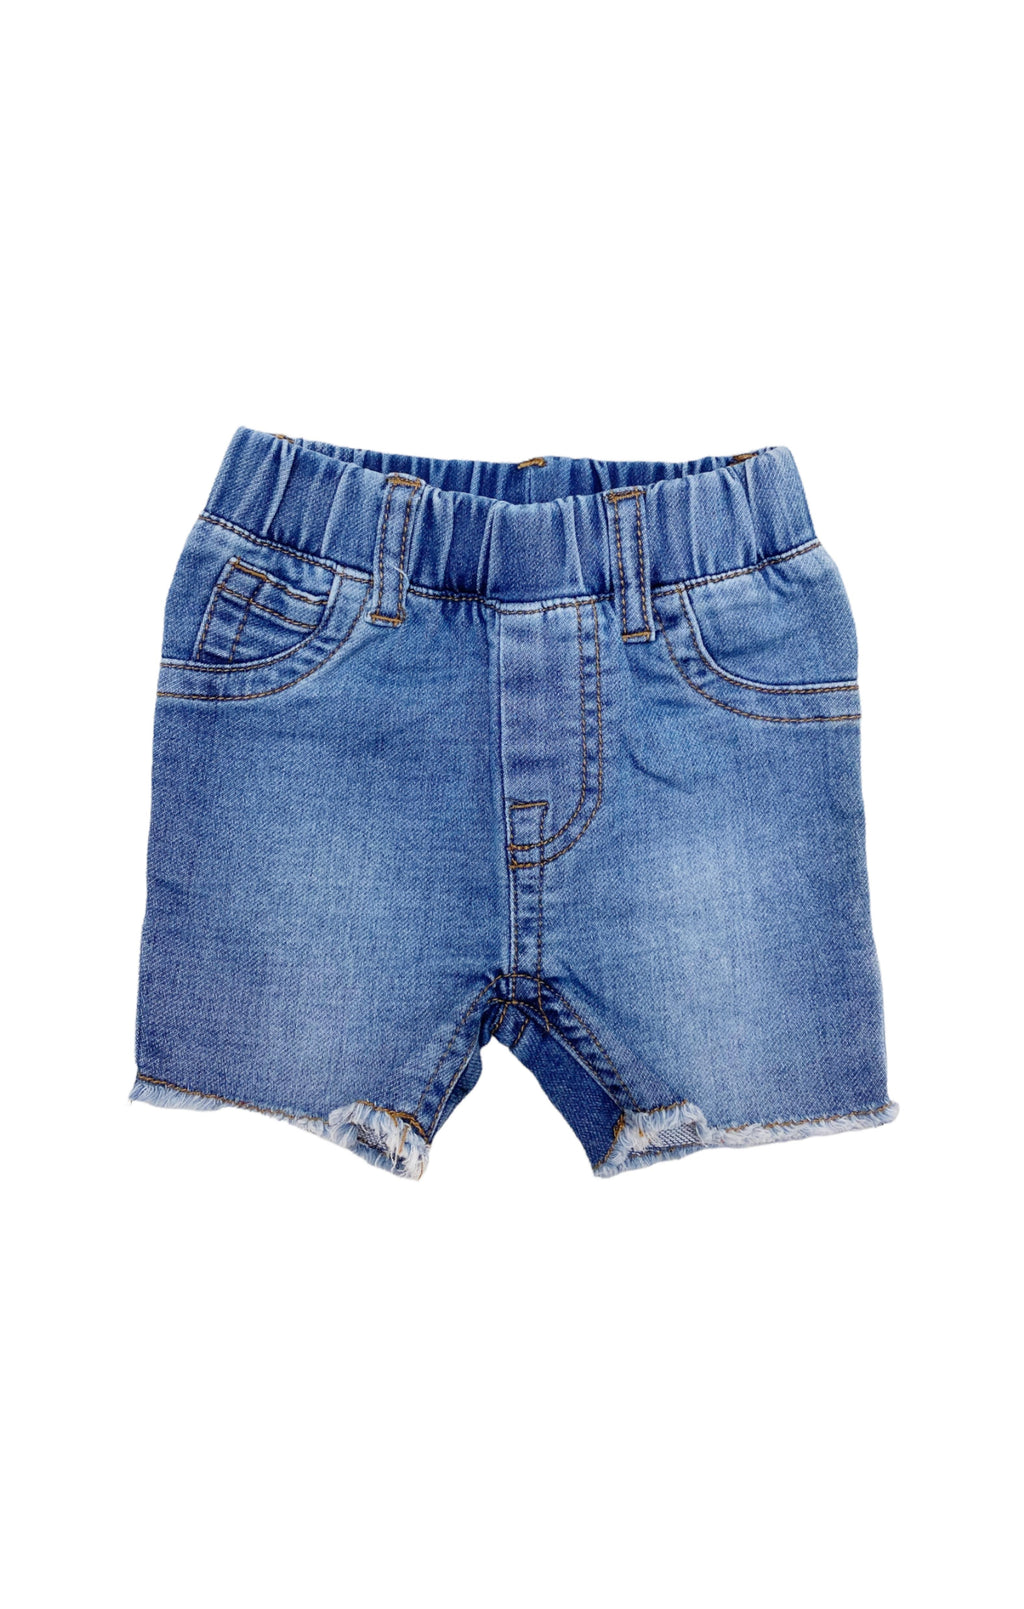 BEAU HUDSON with tags Shorts Size: Youth 2